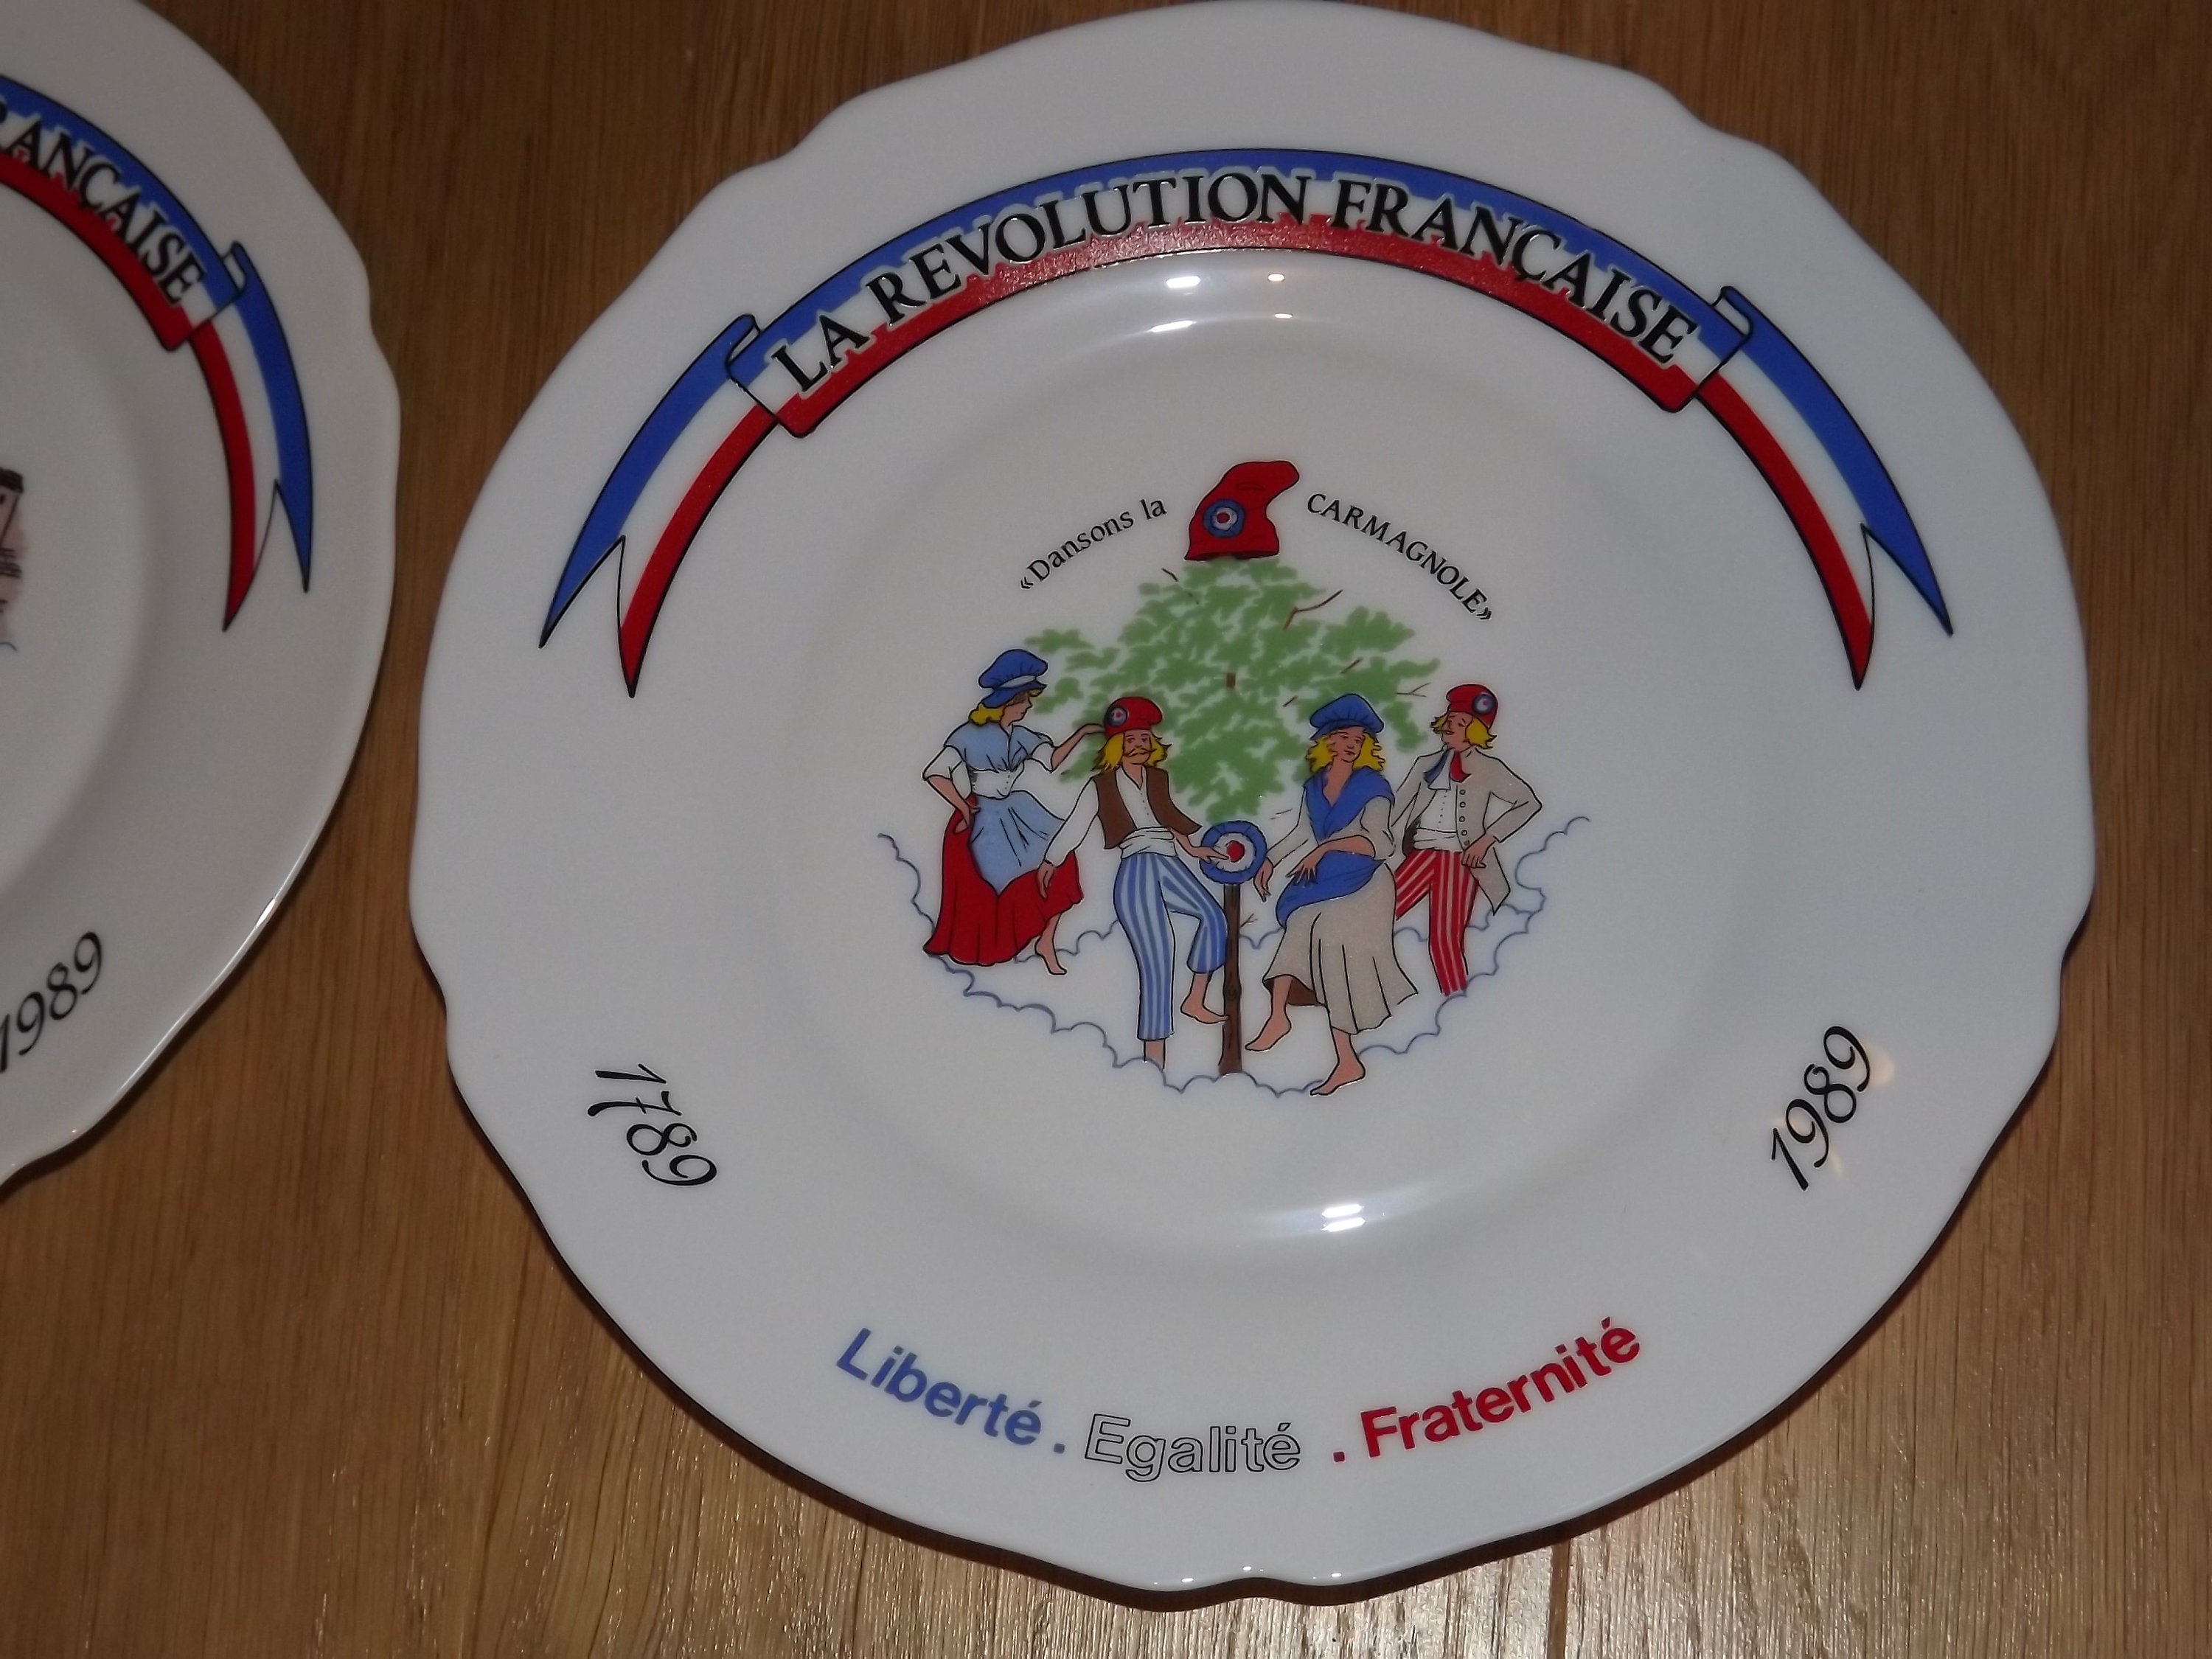 Does anyone collect Arcopal France? I bought these plates but cannot find  any info about the pattern. I can't really find any articles about  collecting Arcopal. (It's fun collecting non-pyrex since it's